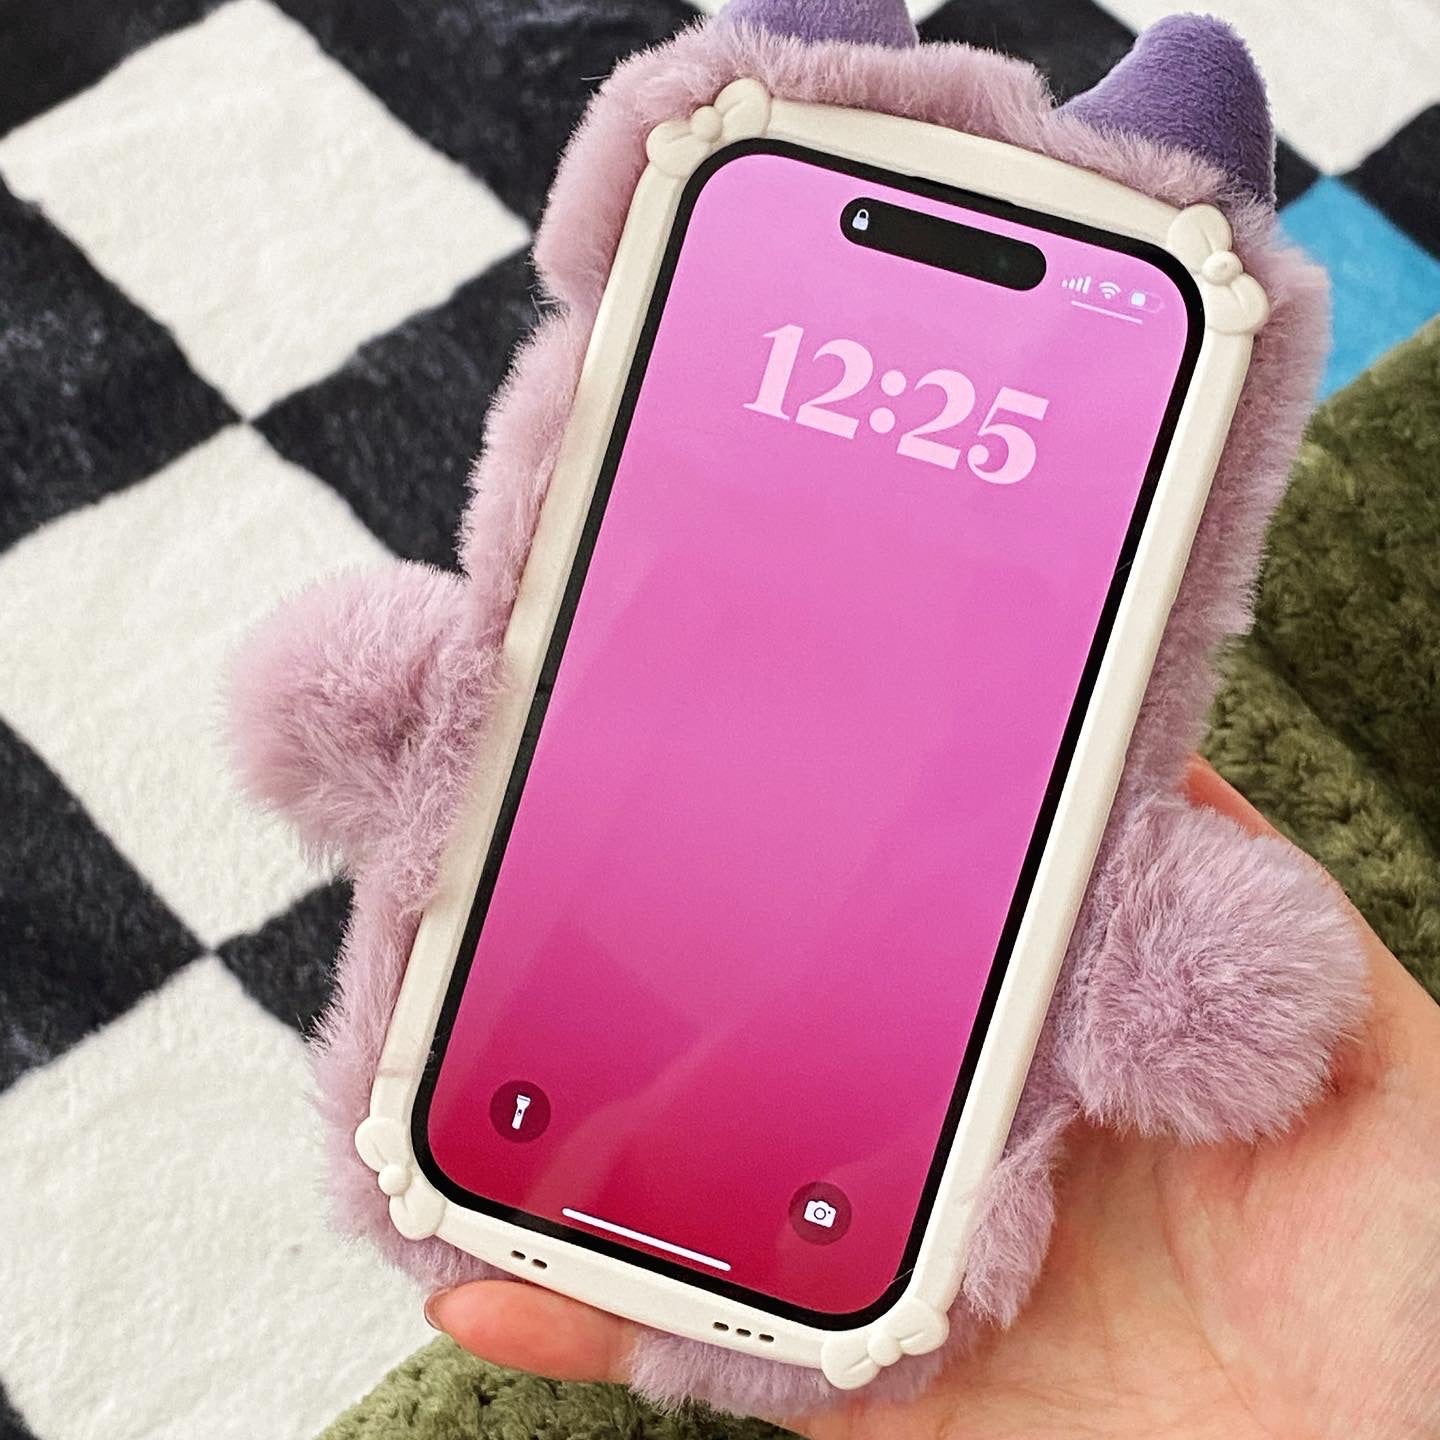 Cute Plush Monster iPhone Case - neverland accessories